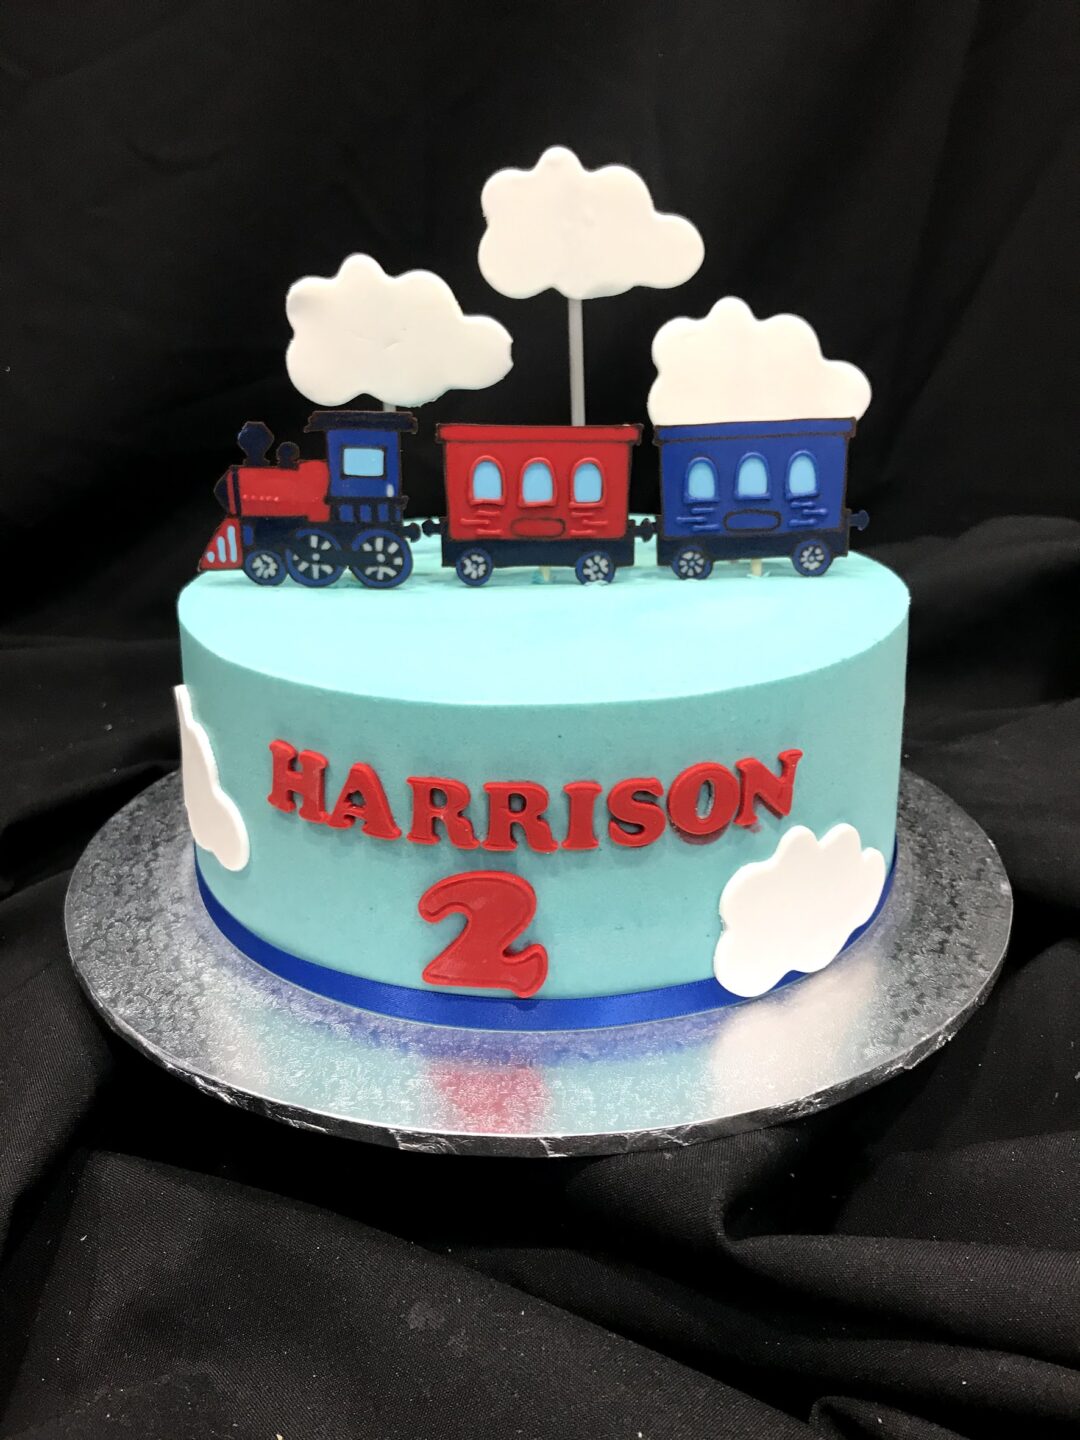 Details more than 83 steam train cake best - awesomeenglish.edu.vn